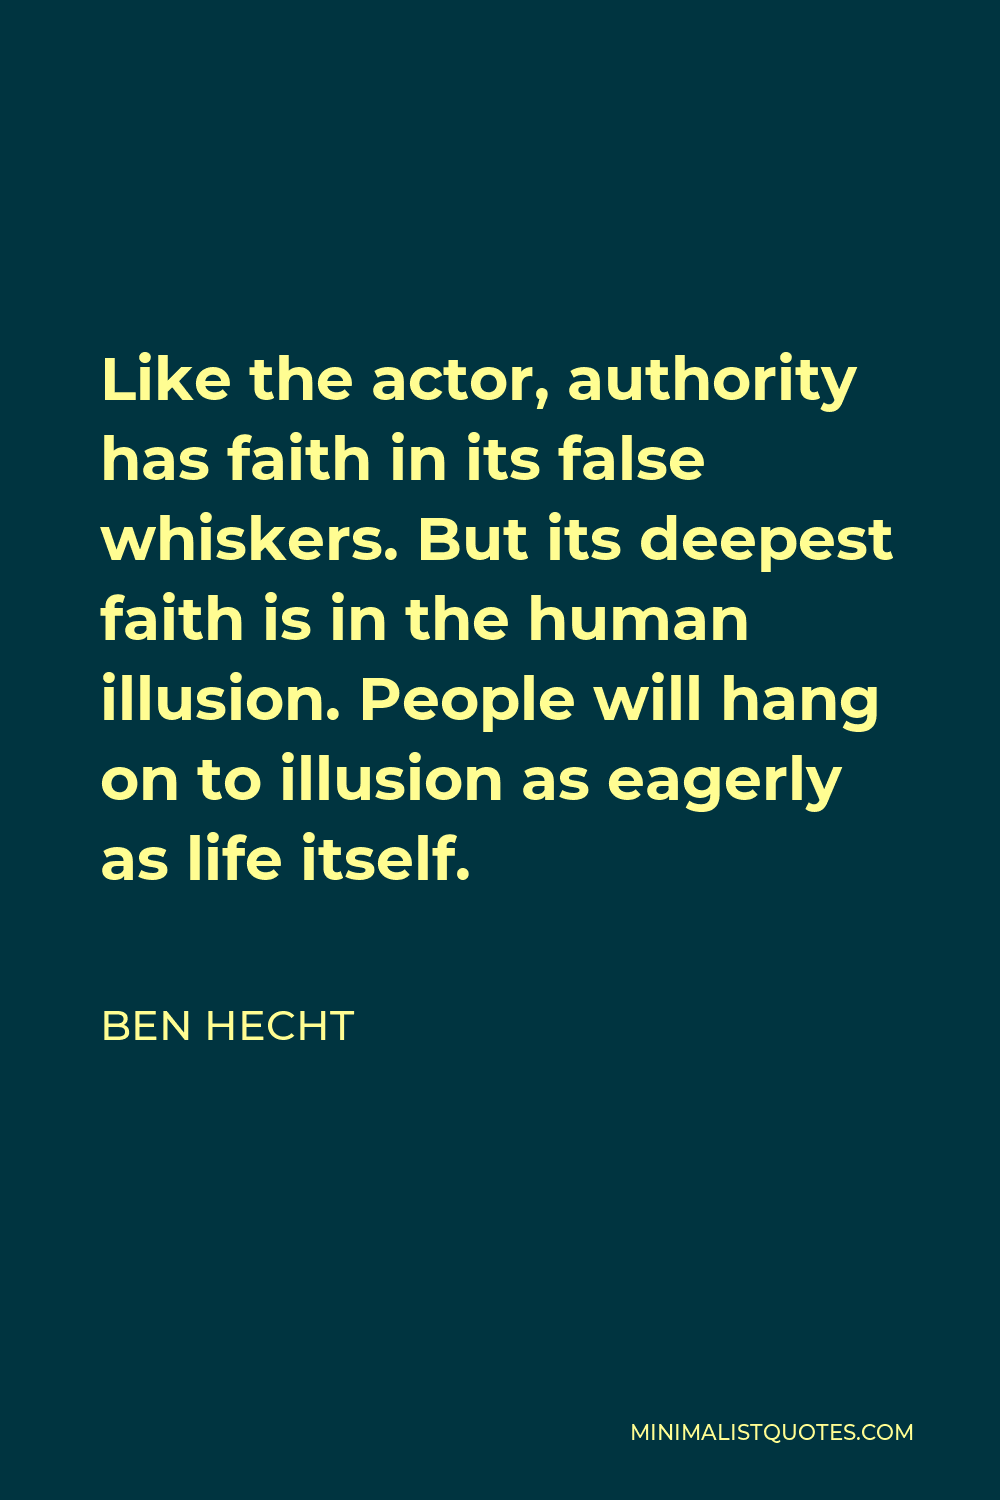 Ben Hecht Quote - Like the actor, authority has faith in its false whiskers. But its deepest faith is in the human illusion. People will hang on to illusion as eagerly as life itself.